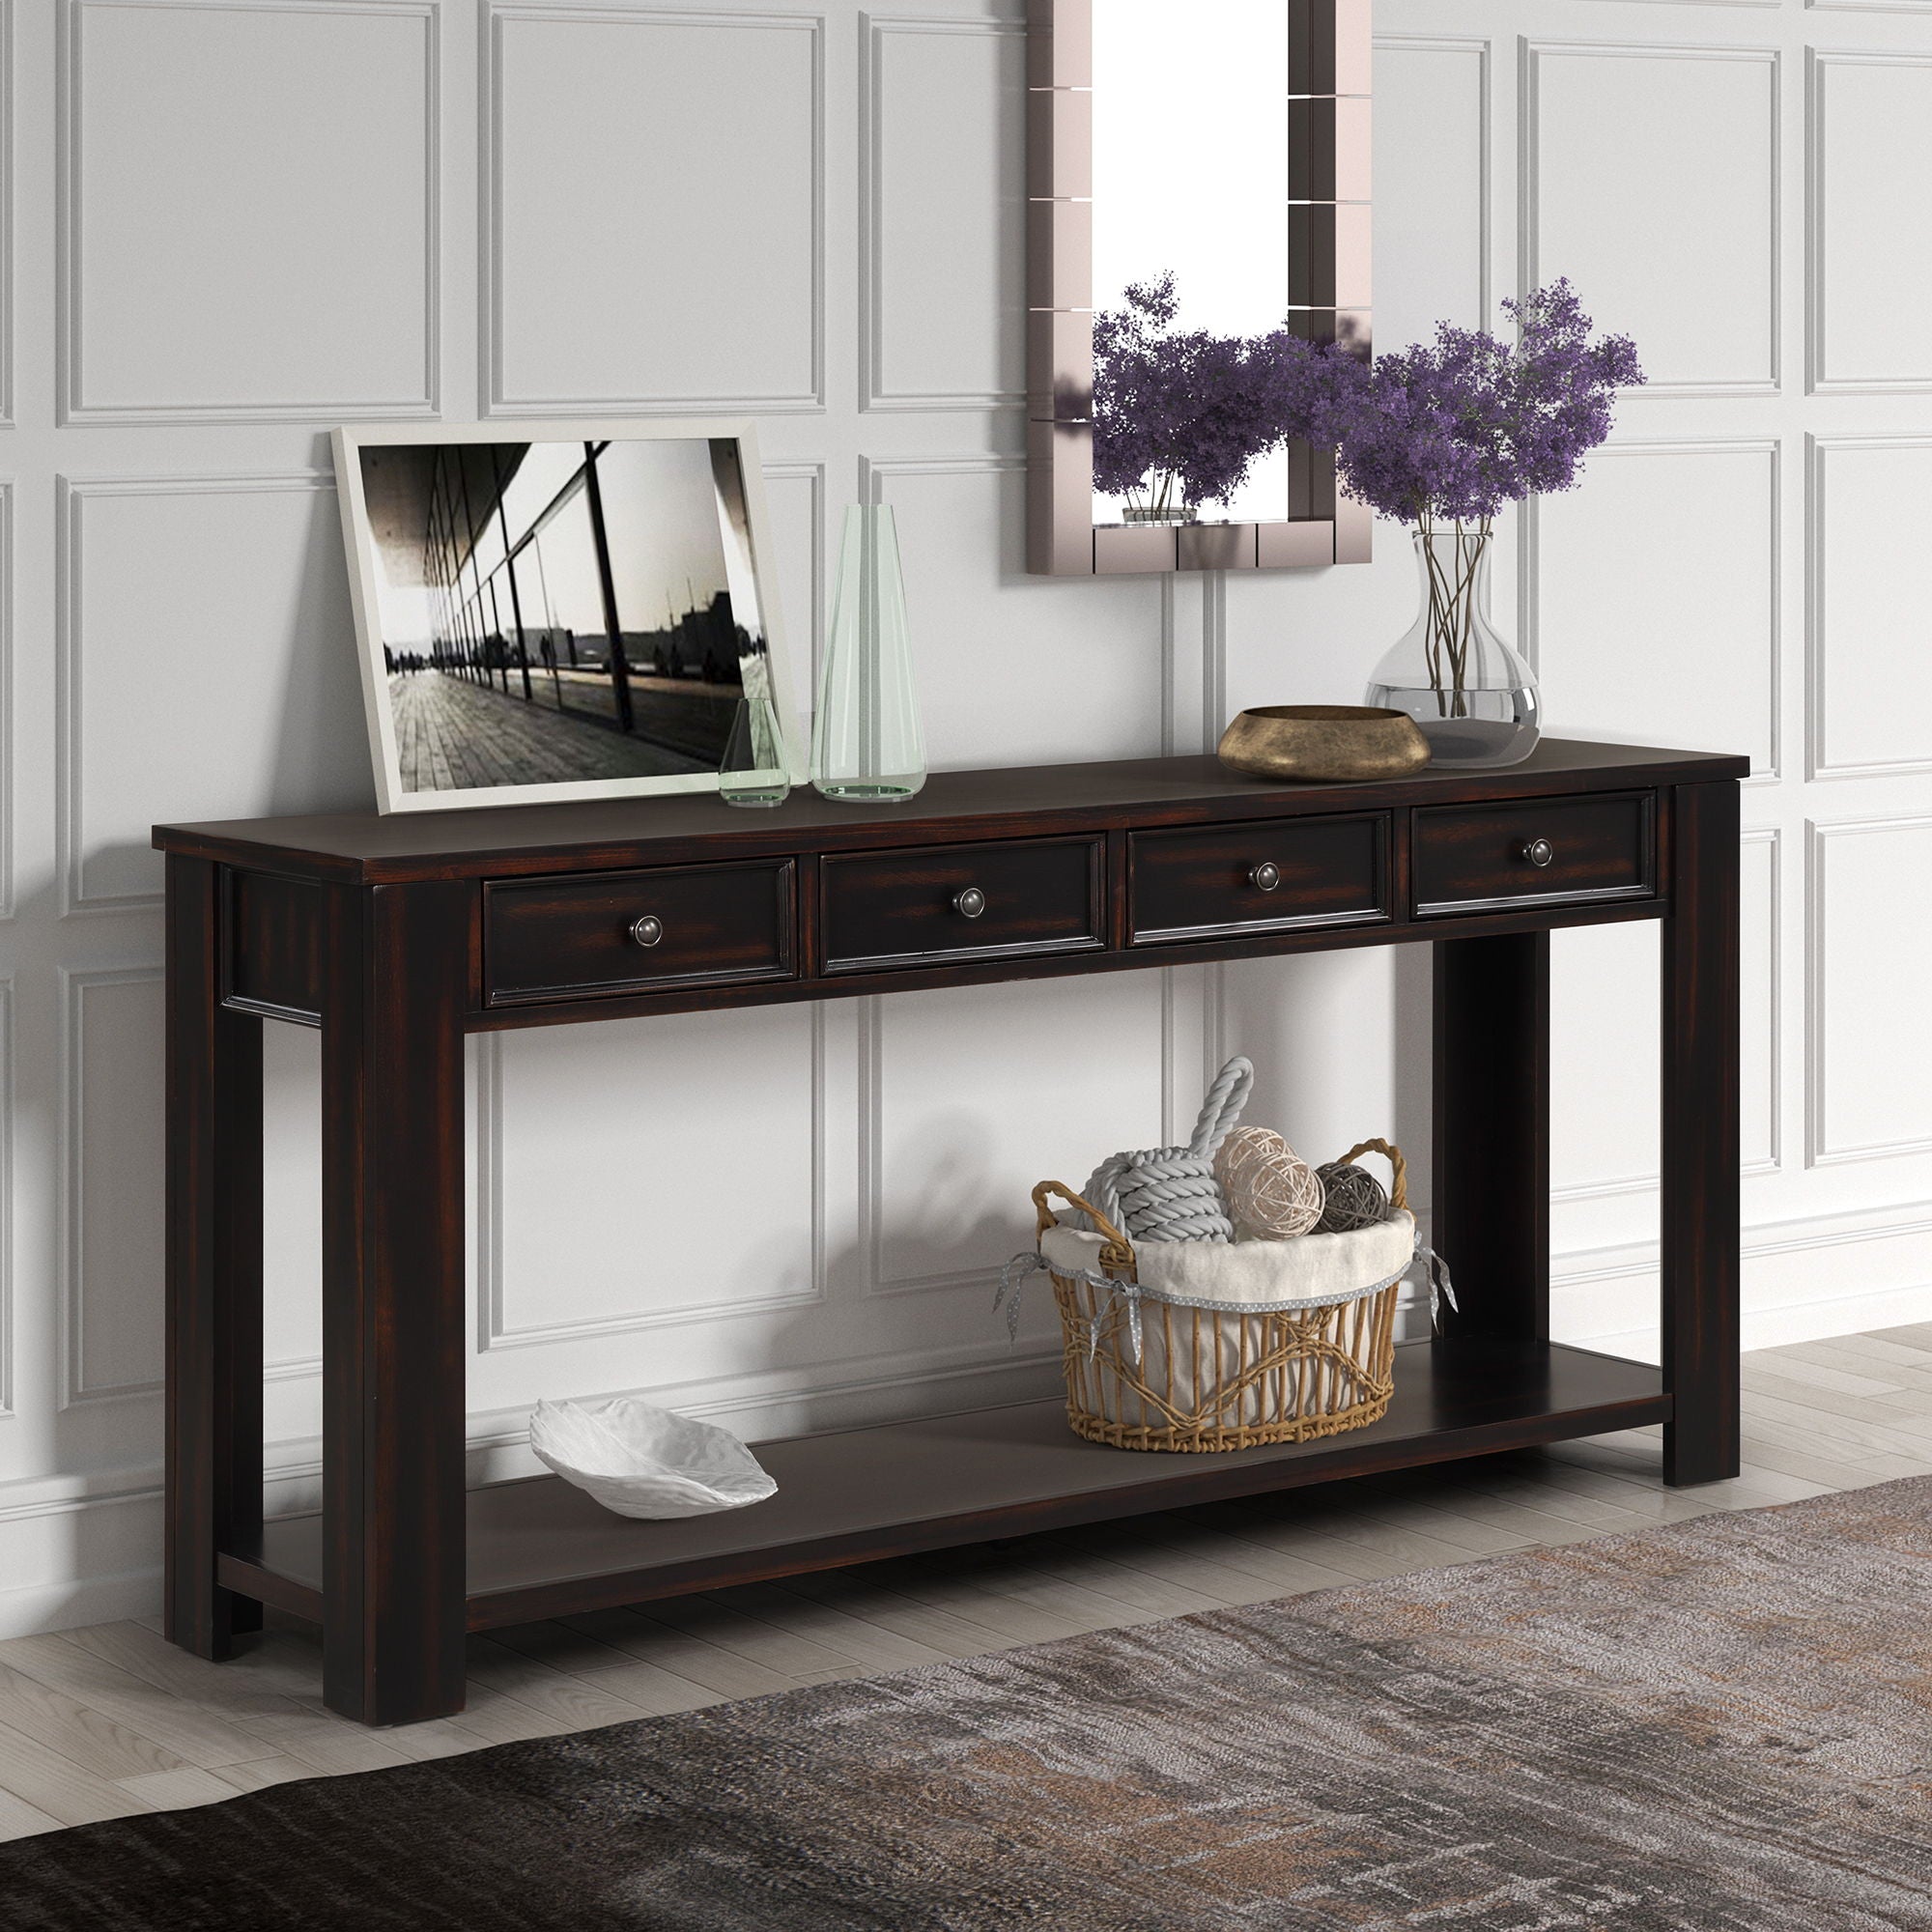 63" Pine Wood Console Table With 4 Drawers And 1 Bottom Shelf For Entryway Hallway Easy Assembly 63" Long Sofa Table (Distressed Black)